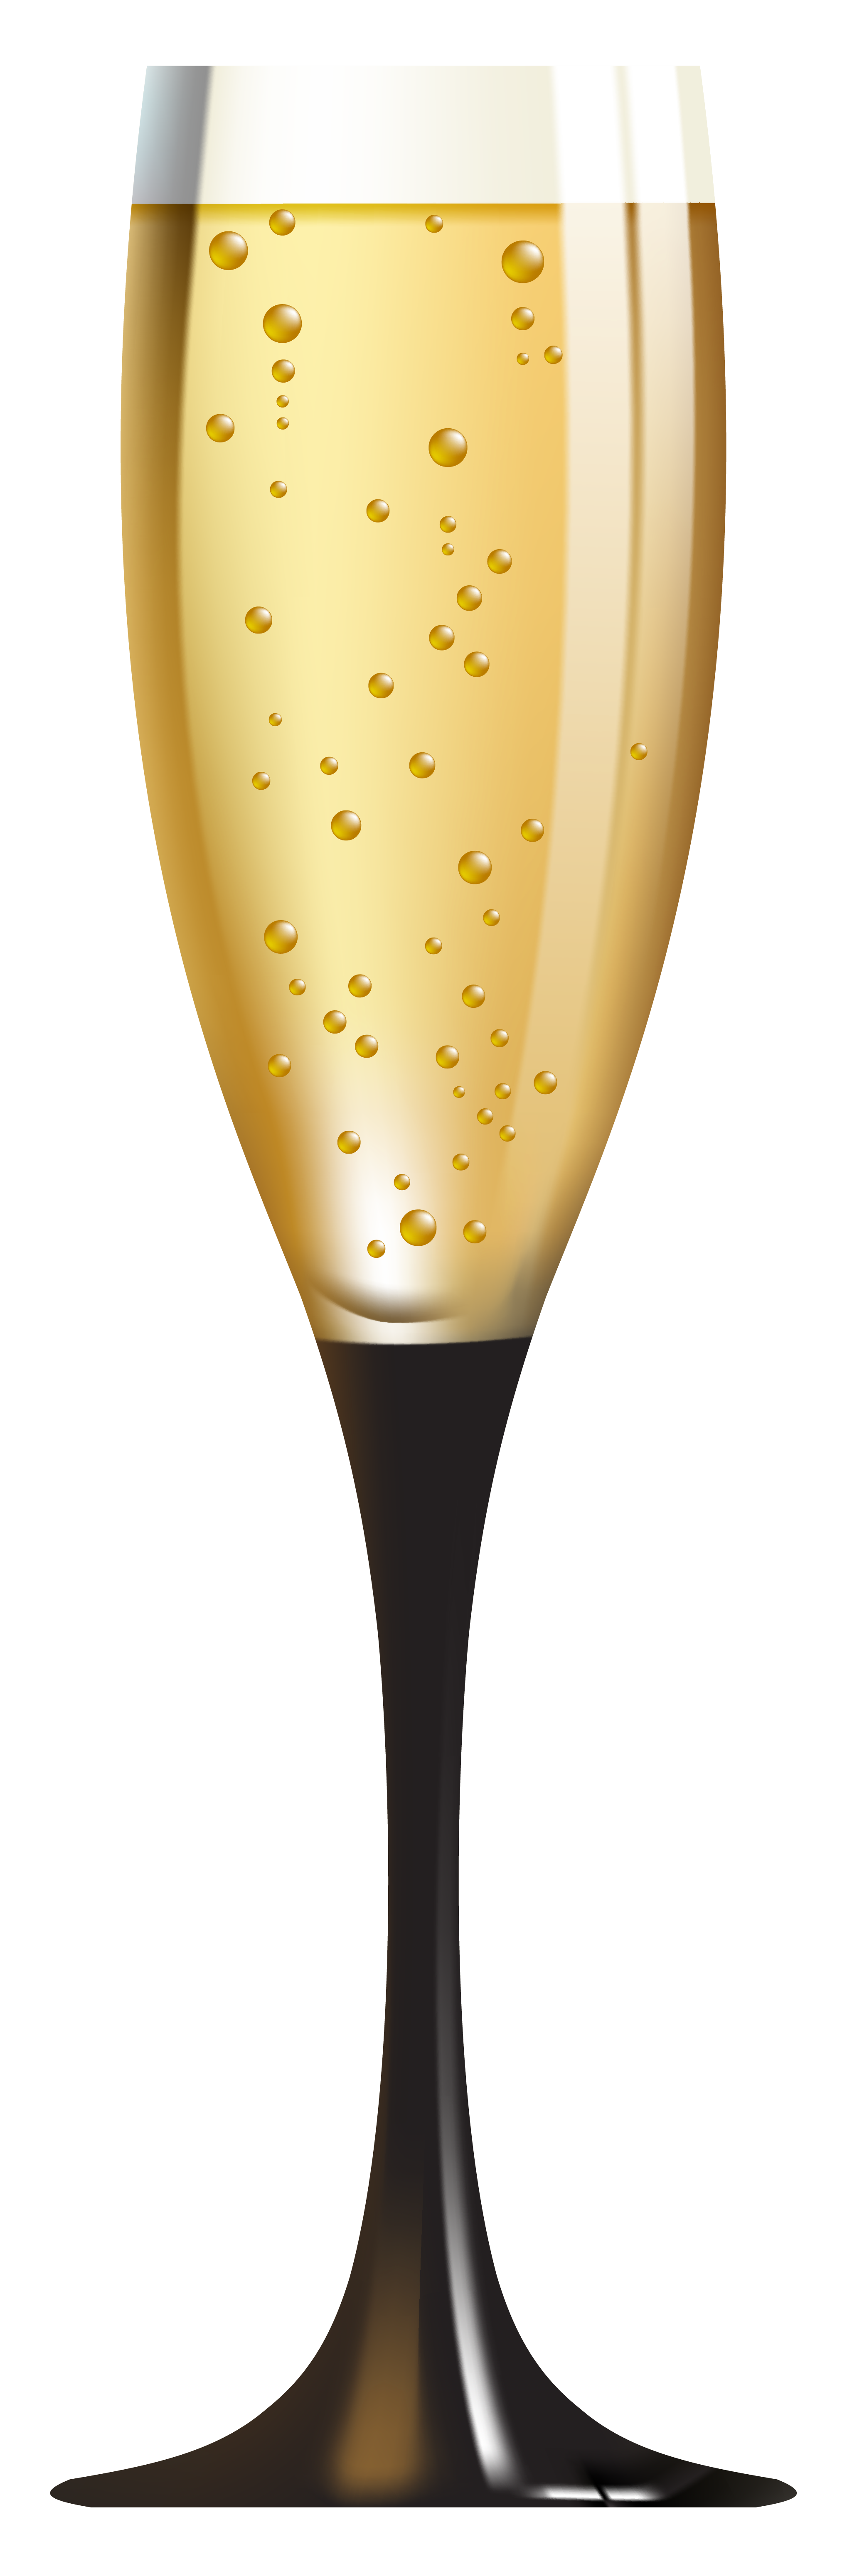 Champagne Free PNG Image